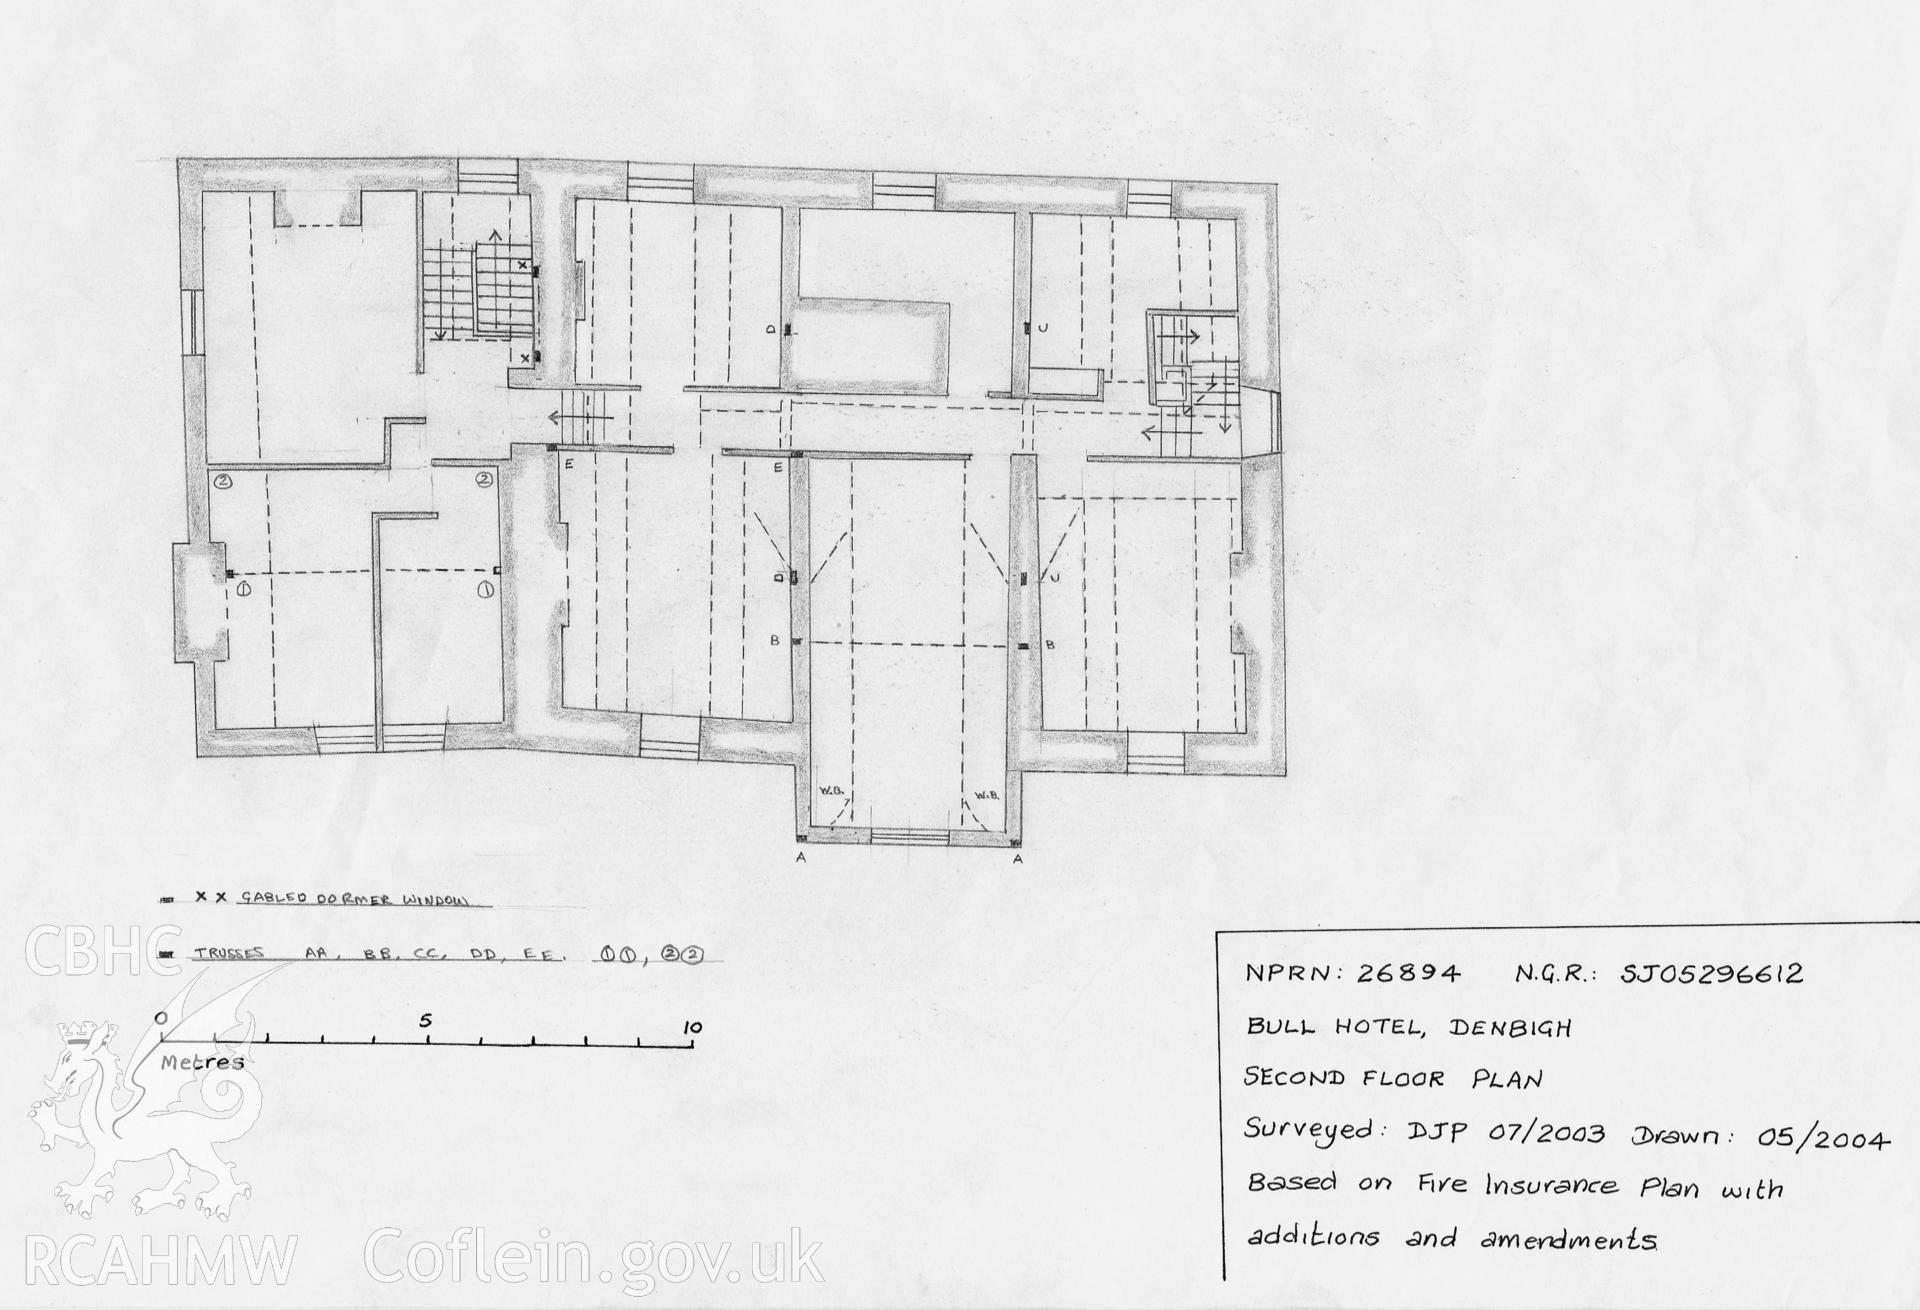 Digital drawing depicting the floor plan of the Bull Hotel, Denbigh, to scale. It is 'based on fire insurance plan with additions and amendments'. Produced by David Percival in 2004, as part of his work at the RCAHMW.